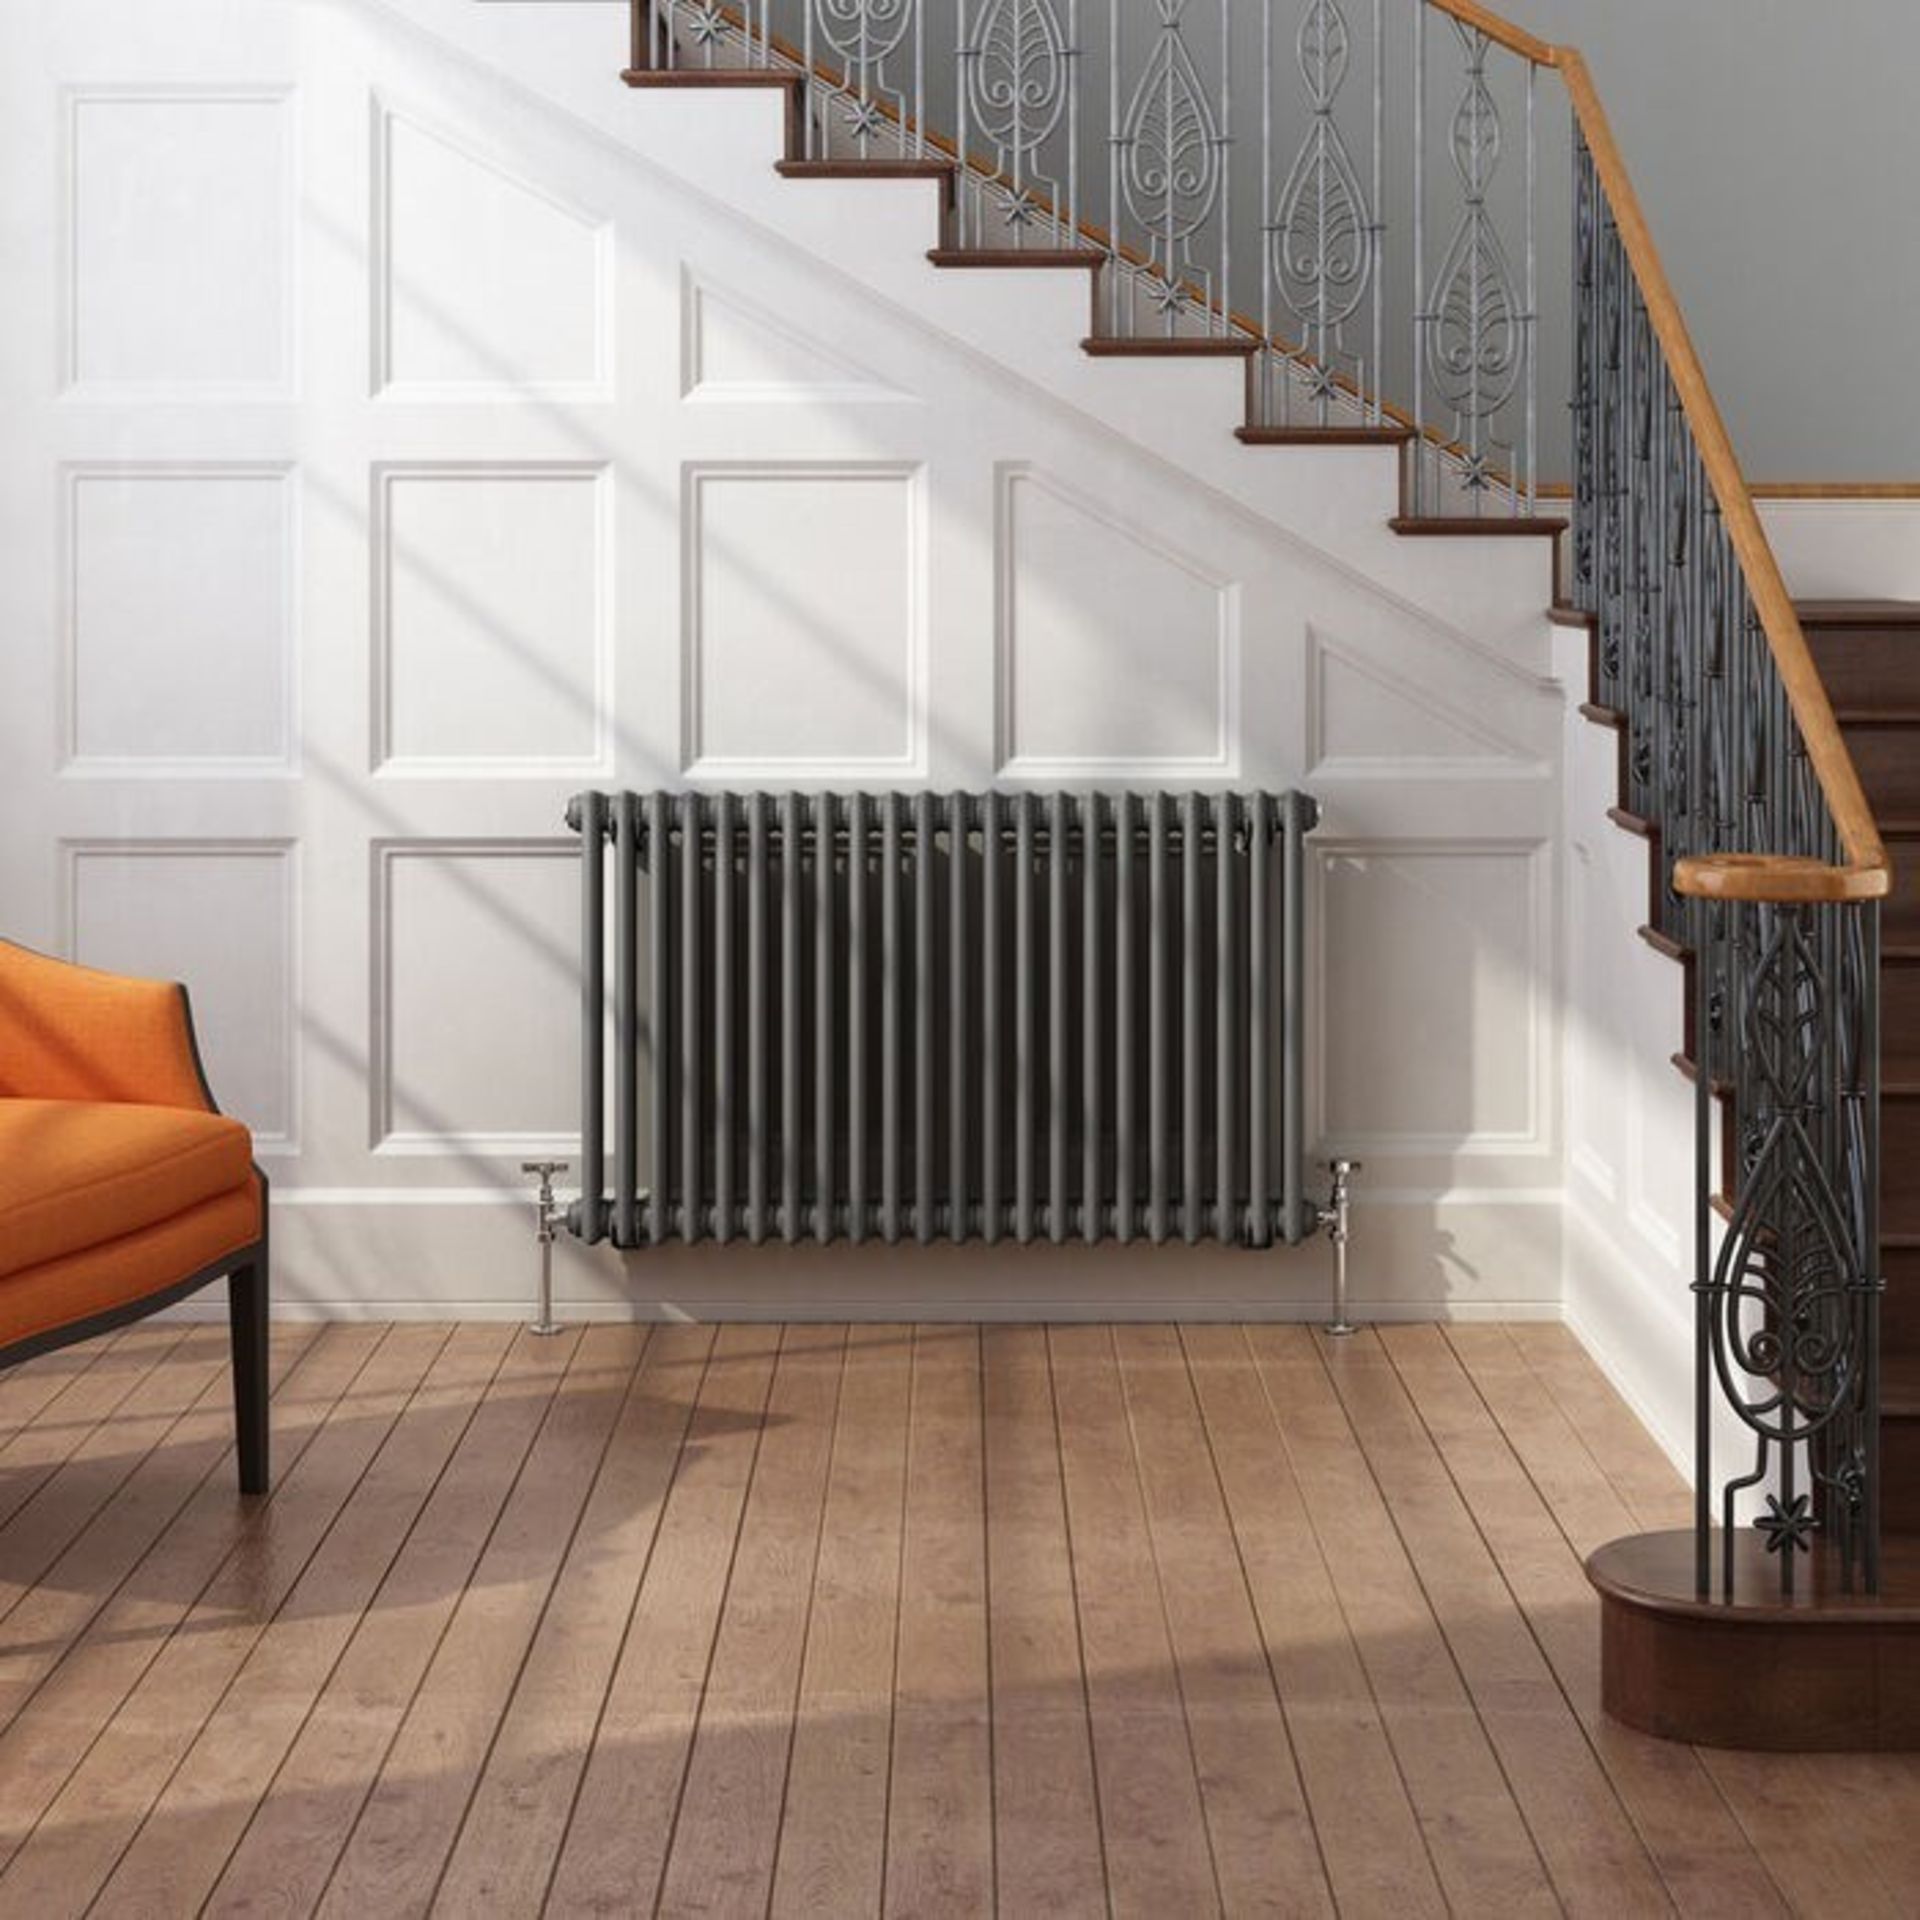 New & Boxed 600x1008mm Anthracite Double Panel Horizontal Colosseum Traditional Radiator. Rrp £549. - Image 2 of 2